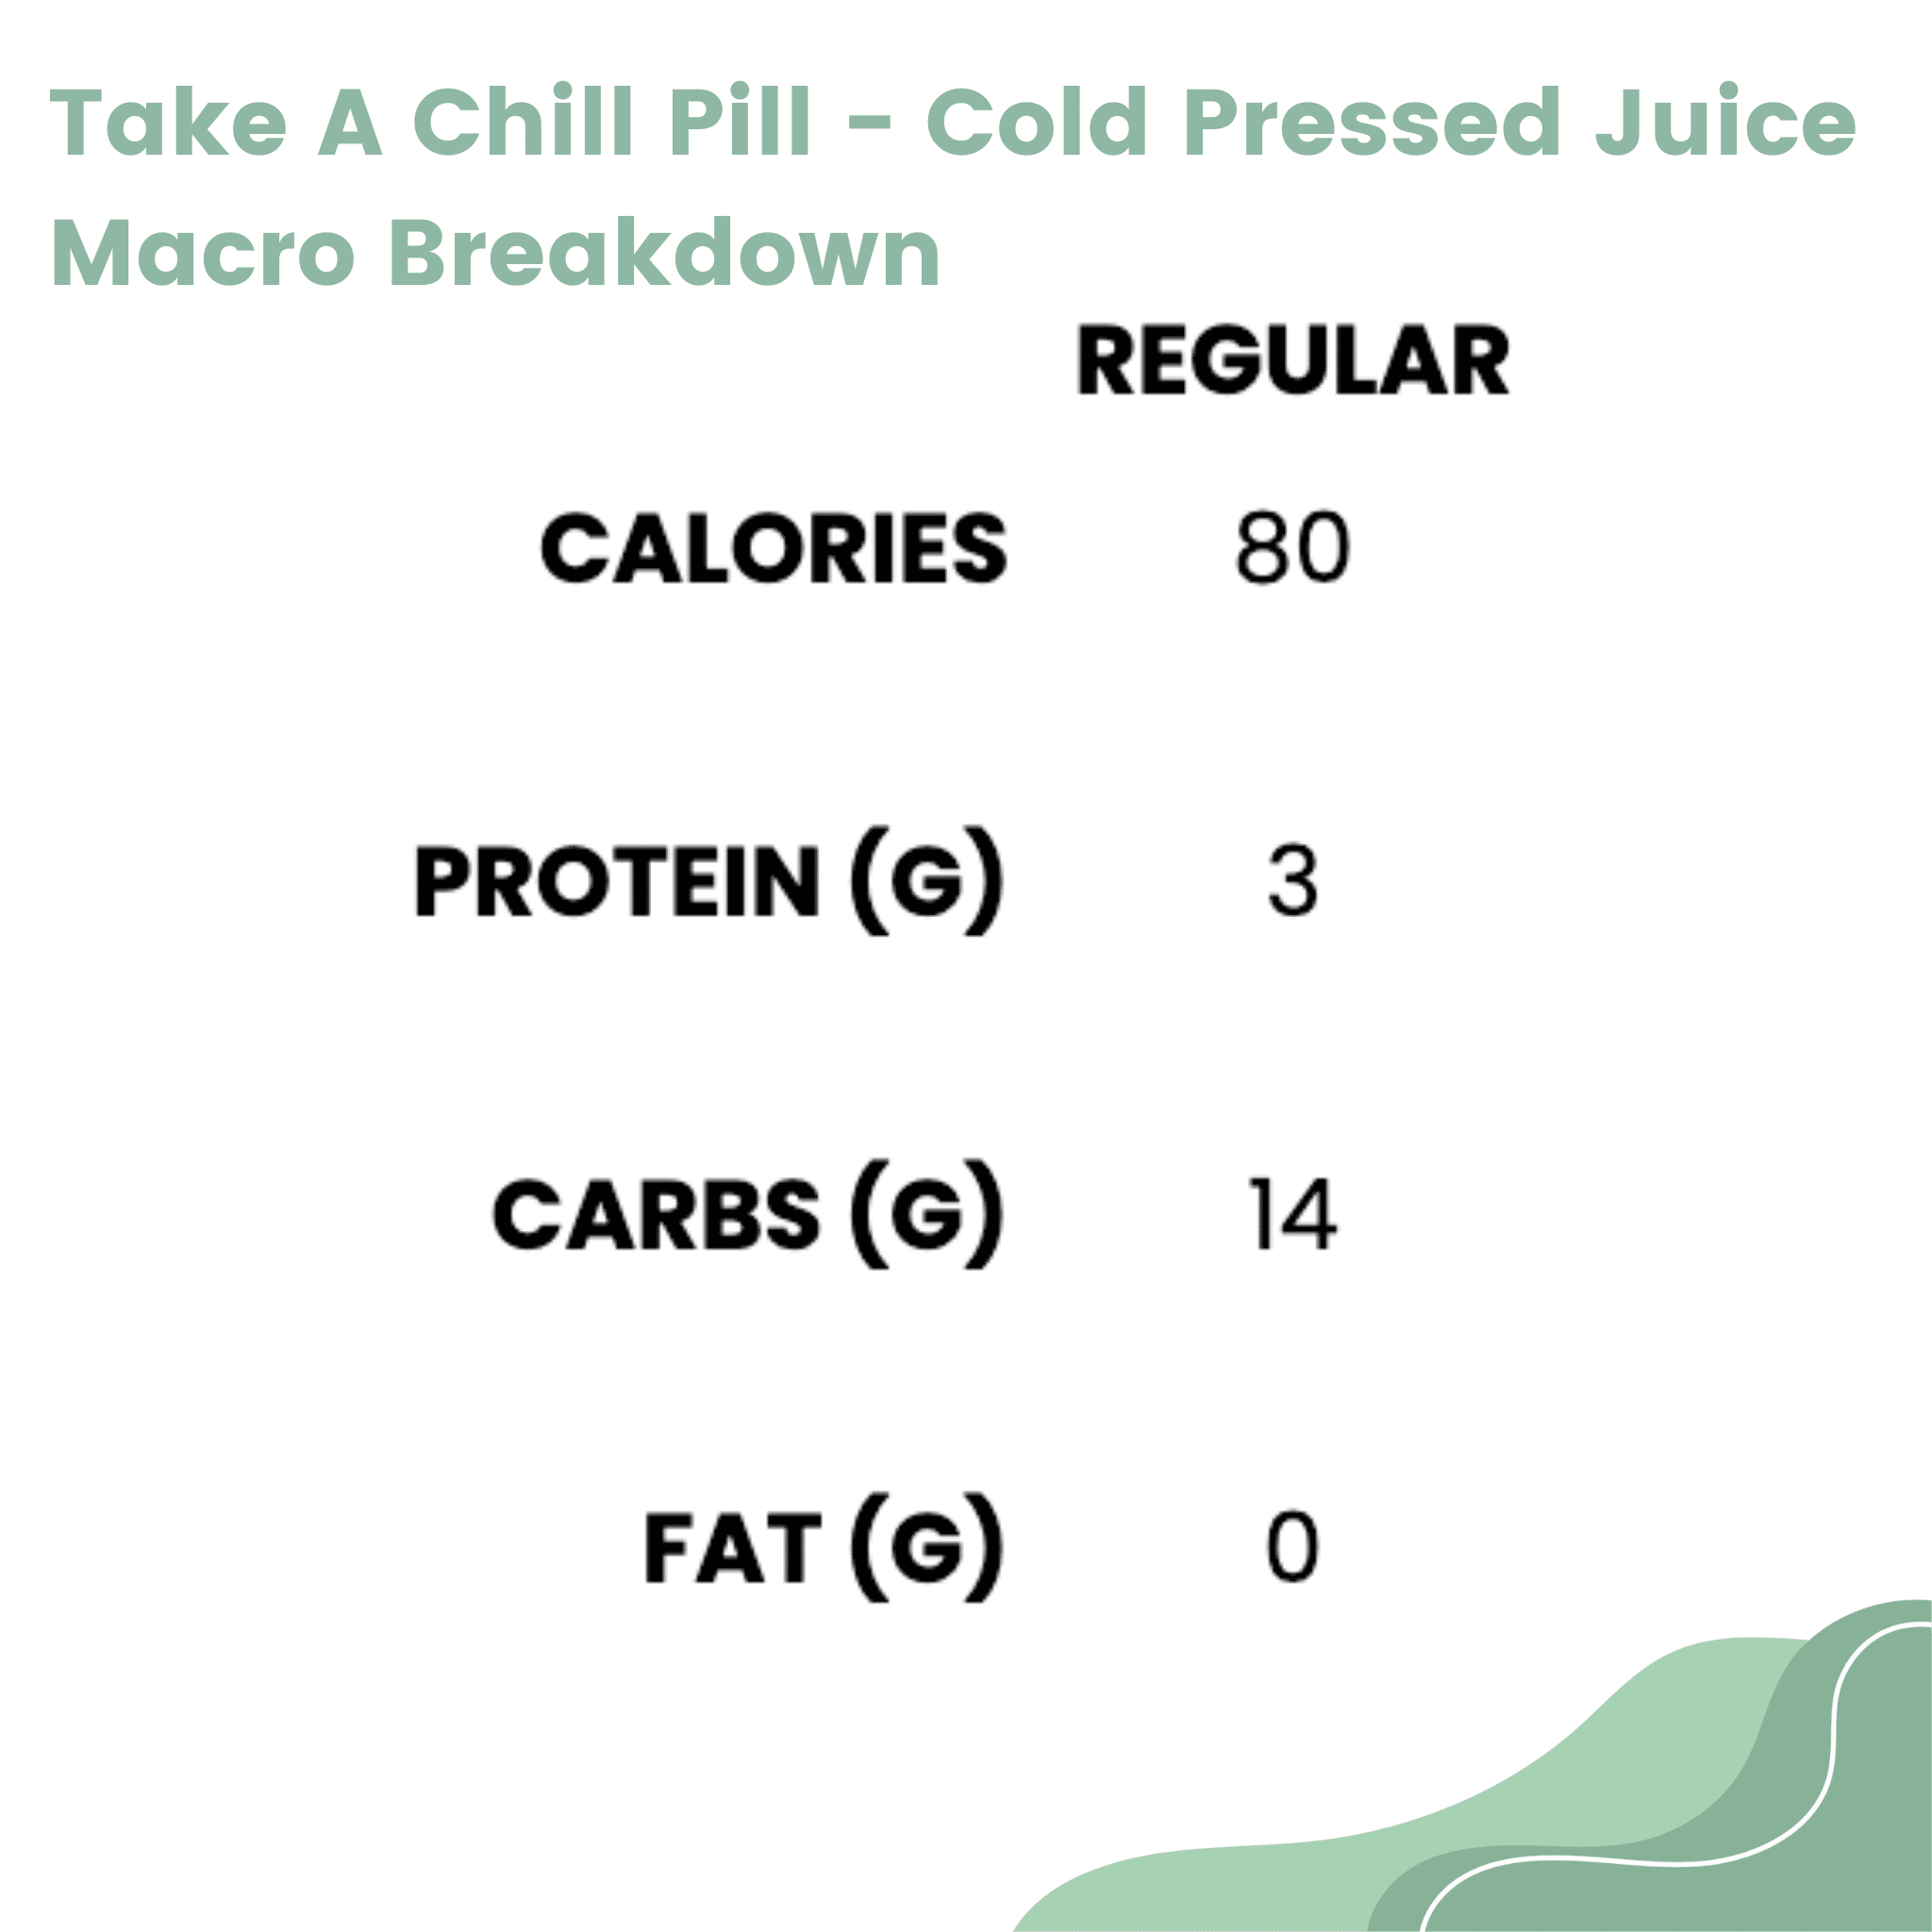 Take a Chill Pill - Cold Pressed Juice